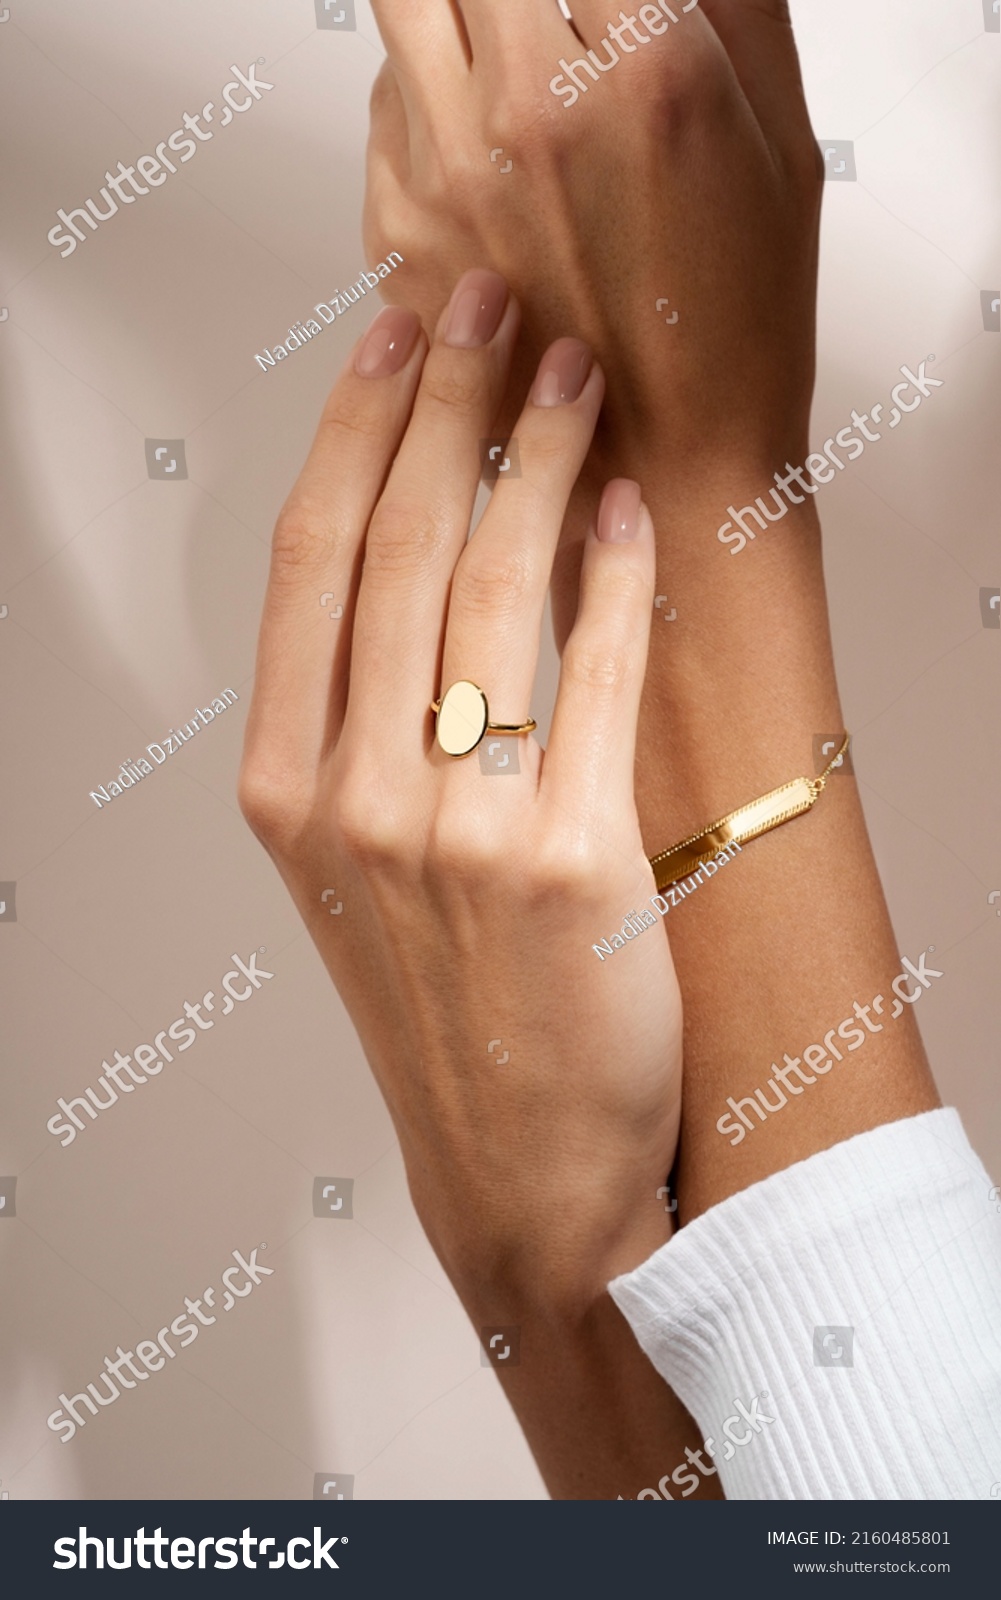 Woman Jewelery concept. Woman’s hands close up wearing rings and bracelet modern accessories elegant life style. Beige background  #2160485801